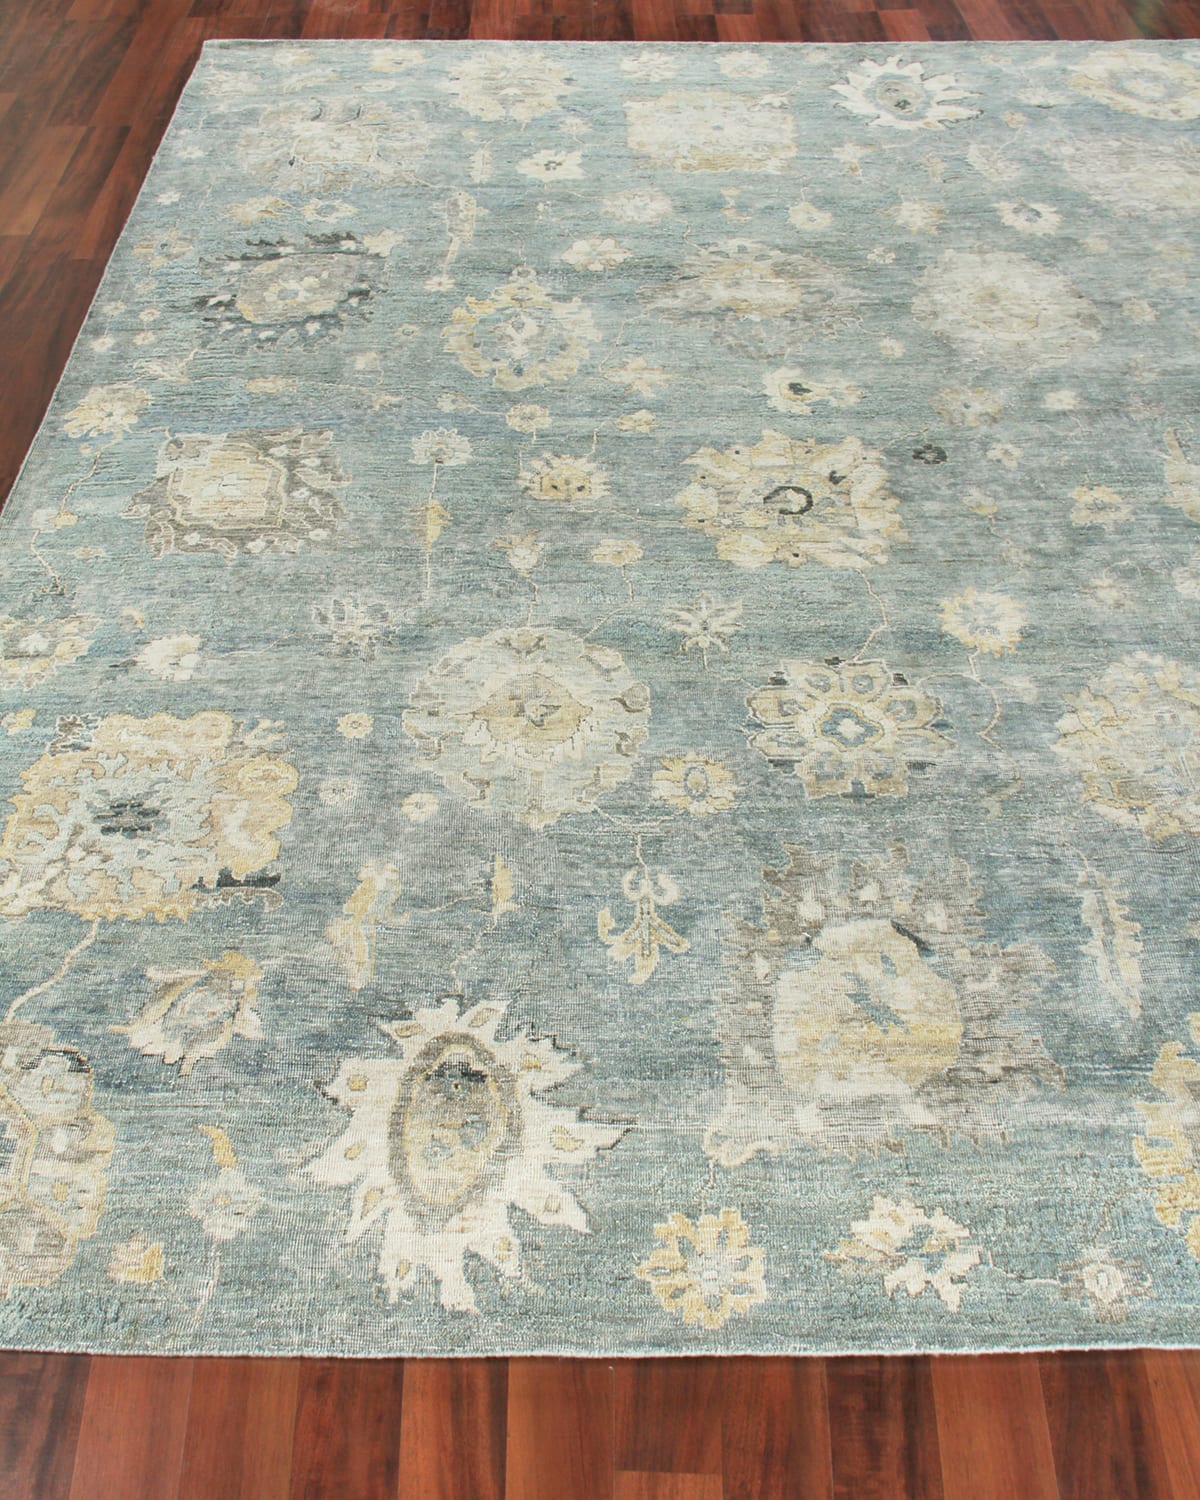 Ogunquit Hand-Knotted Wool Rug, 6' x 9'